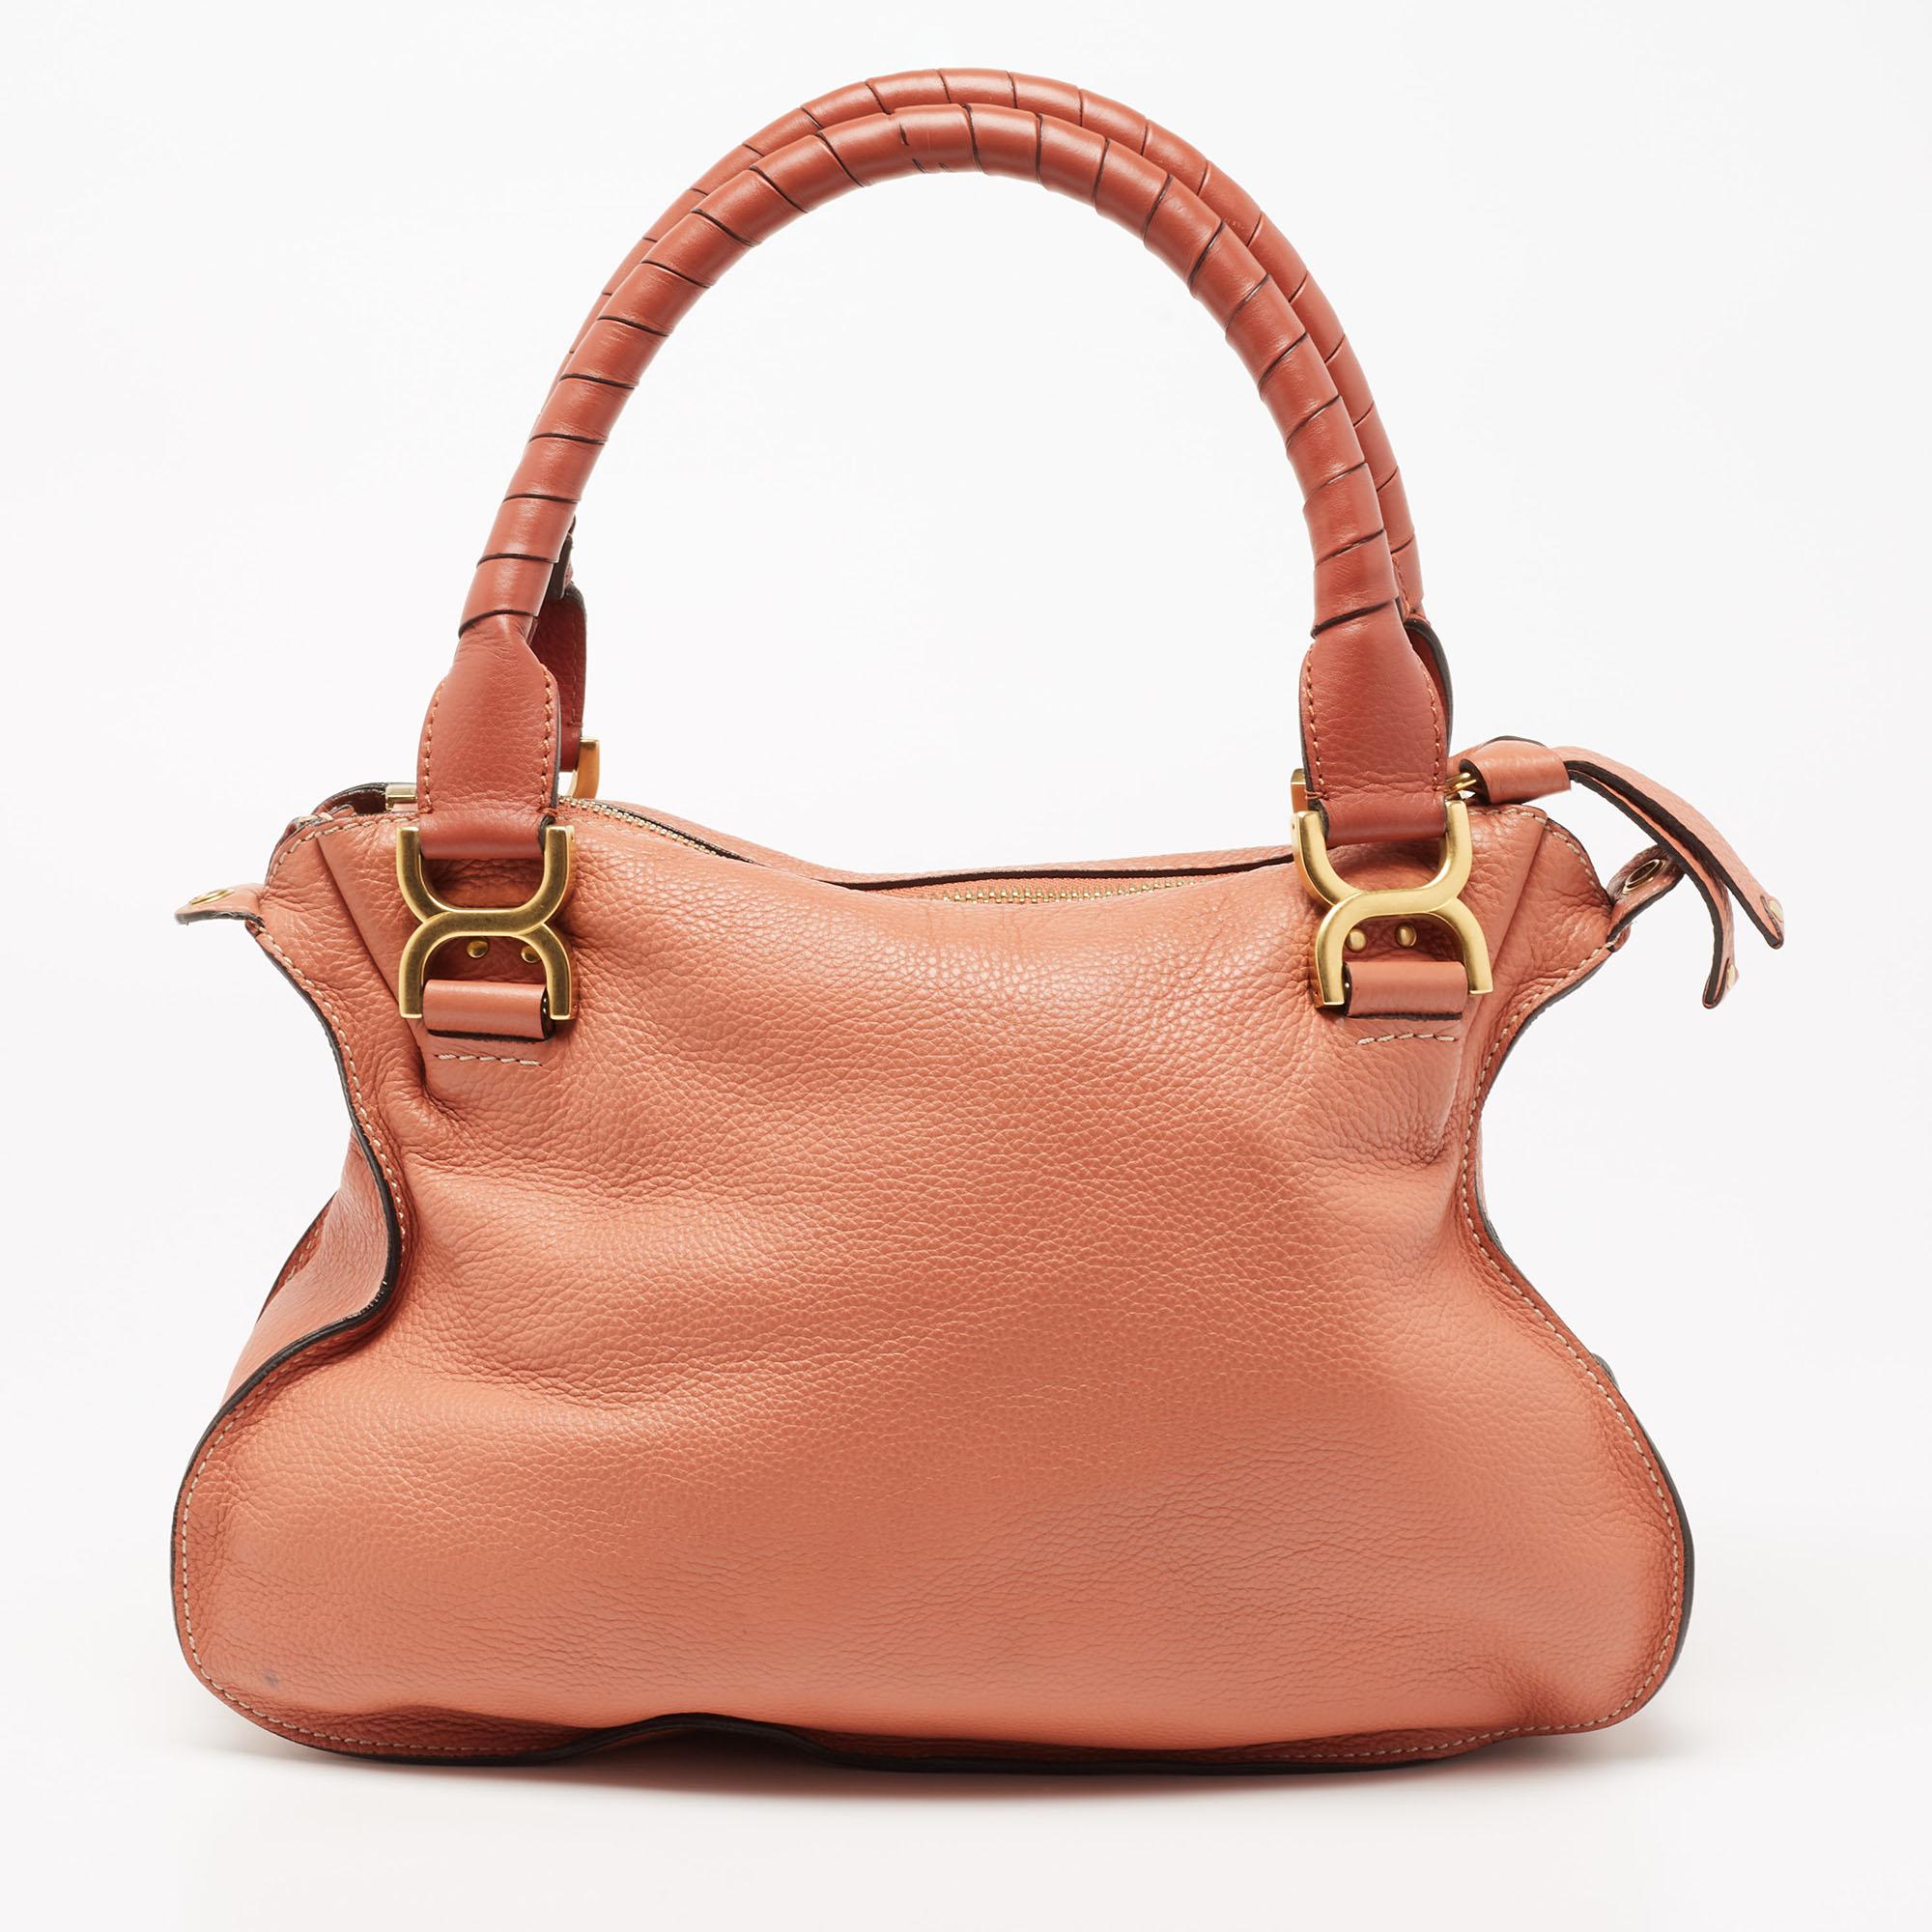 Stunning to look at and durable enough to accompany you wherever you go, this Chloe shoulder bag is a joy to own! This Marcie bag is crafted from leather with dual handles and a well-designed front exterior enhanced with stitch detailing and